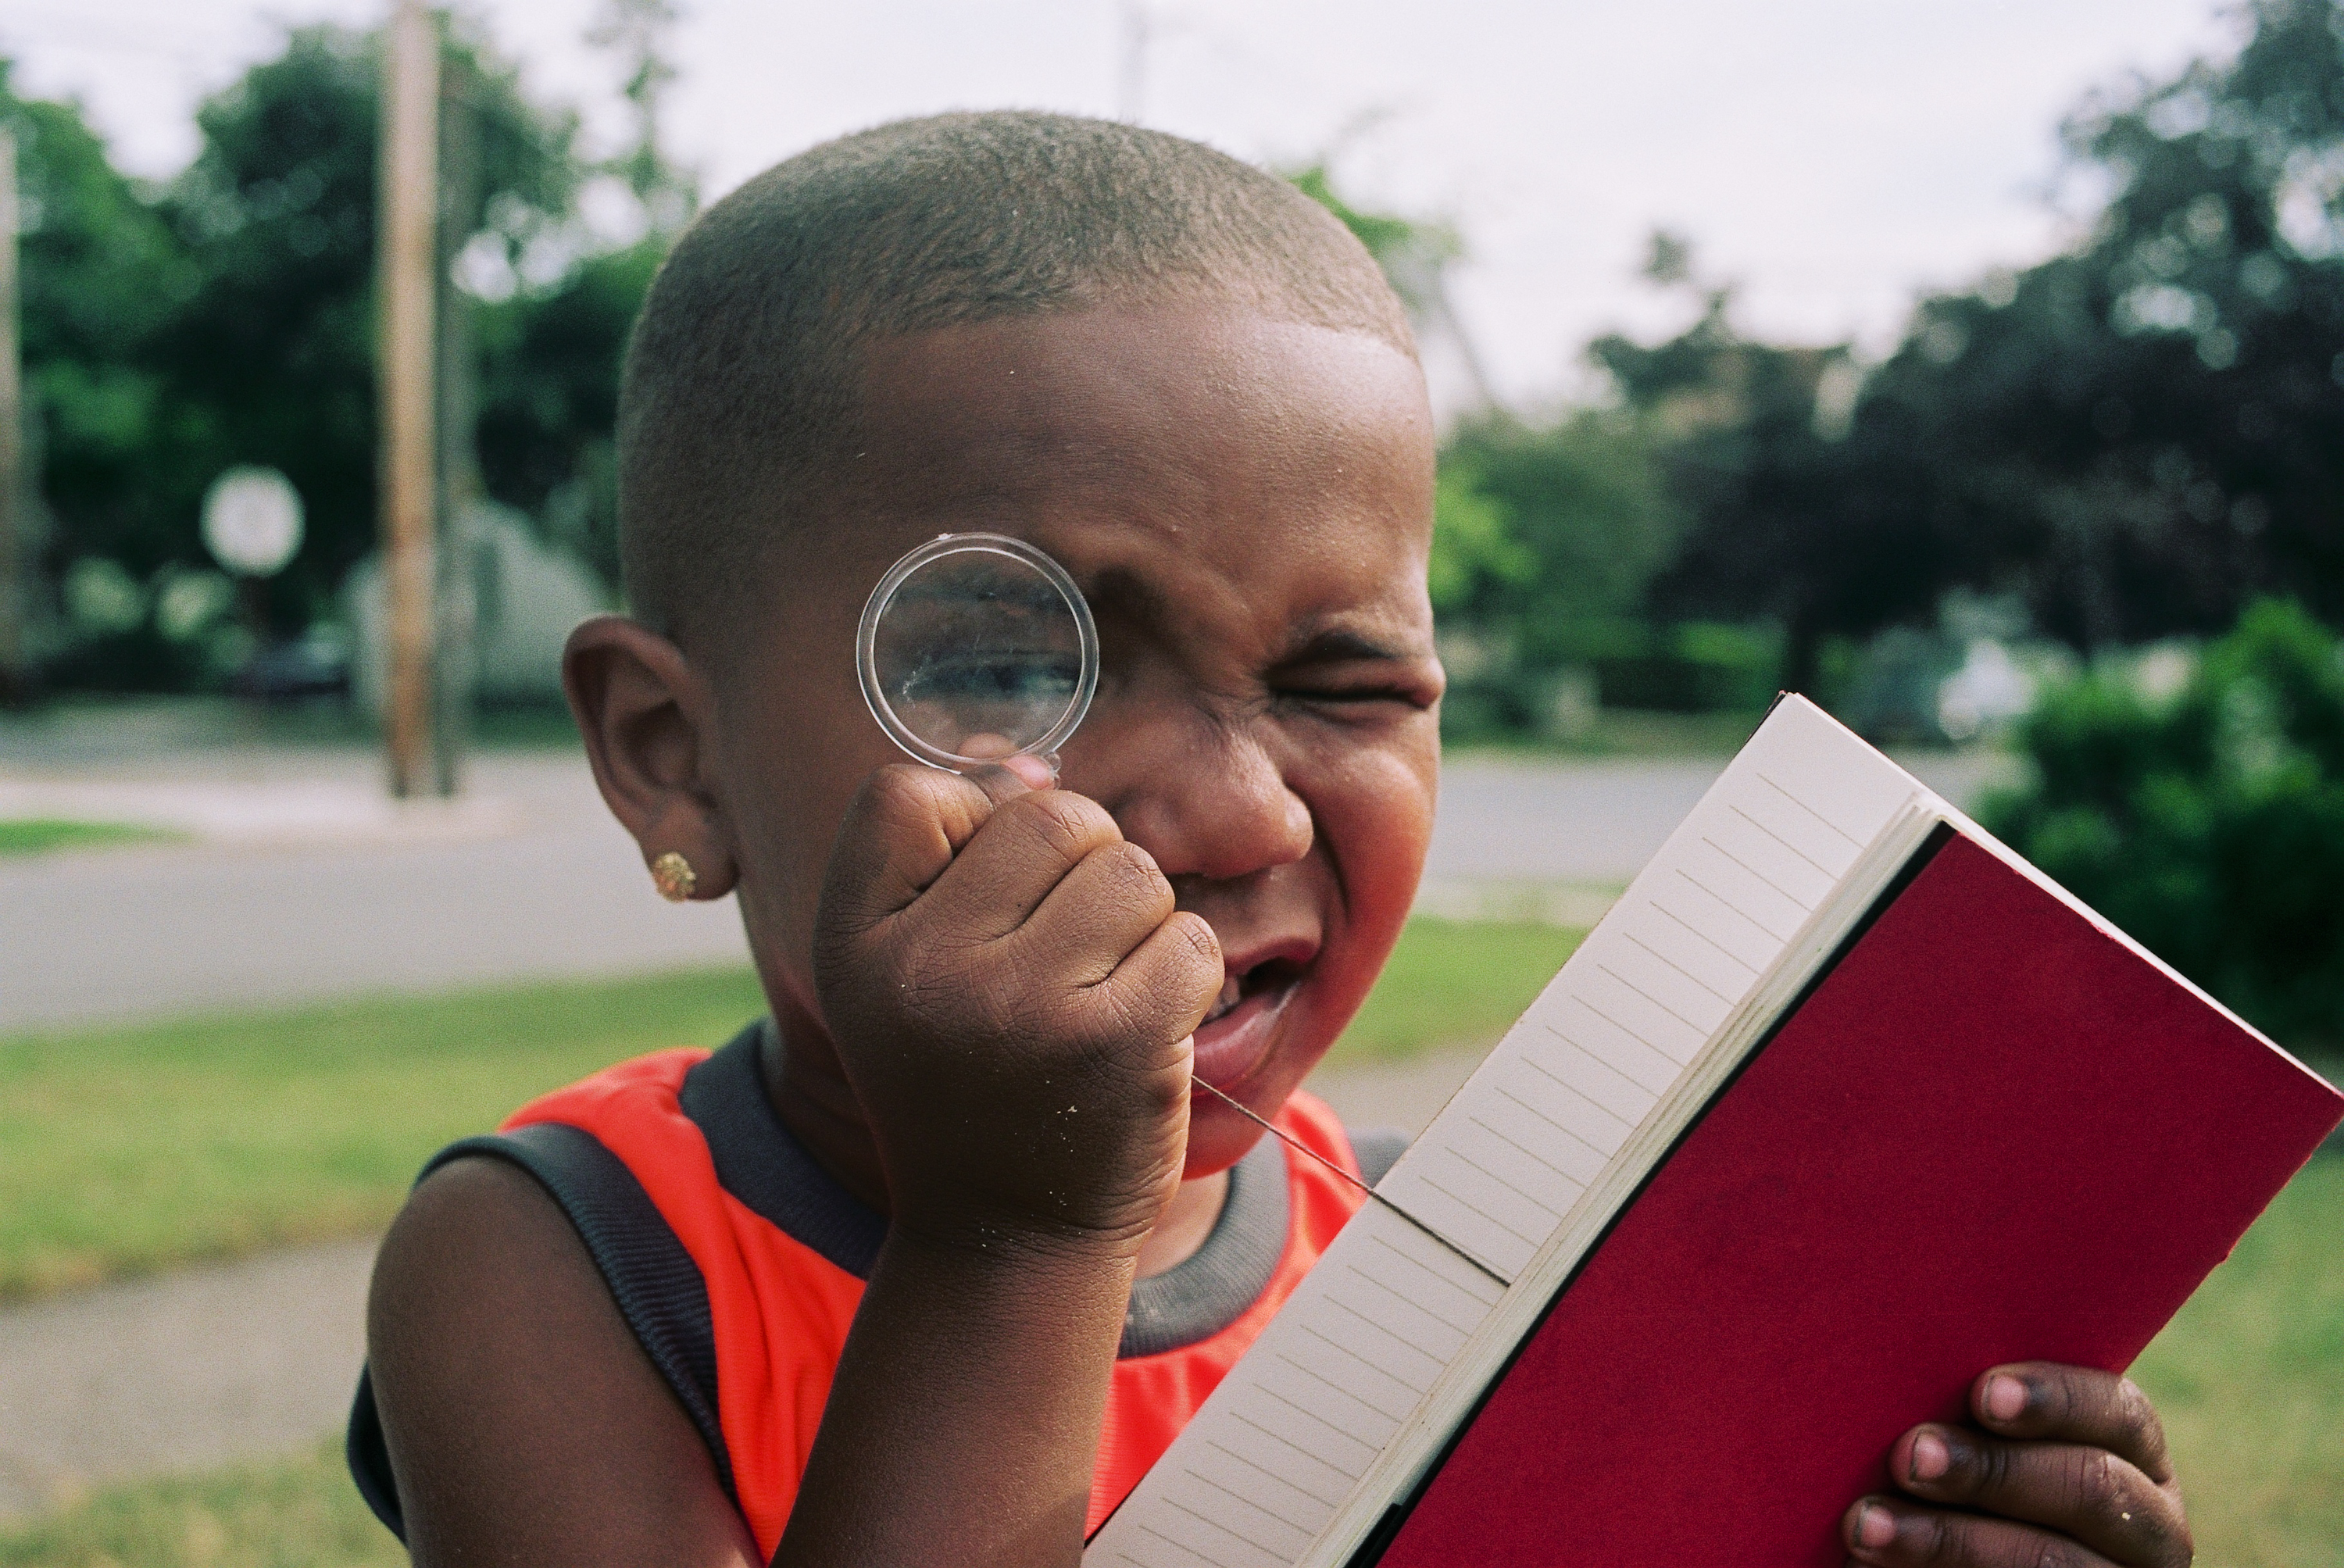 A child looks through a magnifying glass attached to a journal